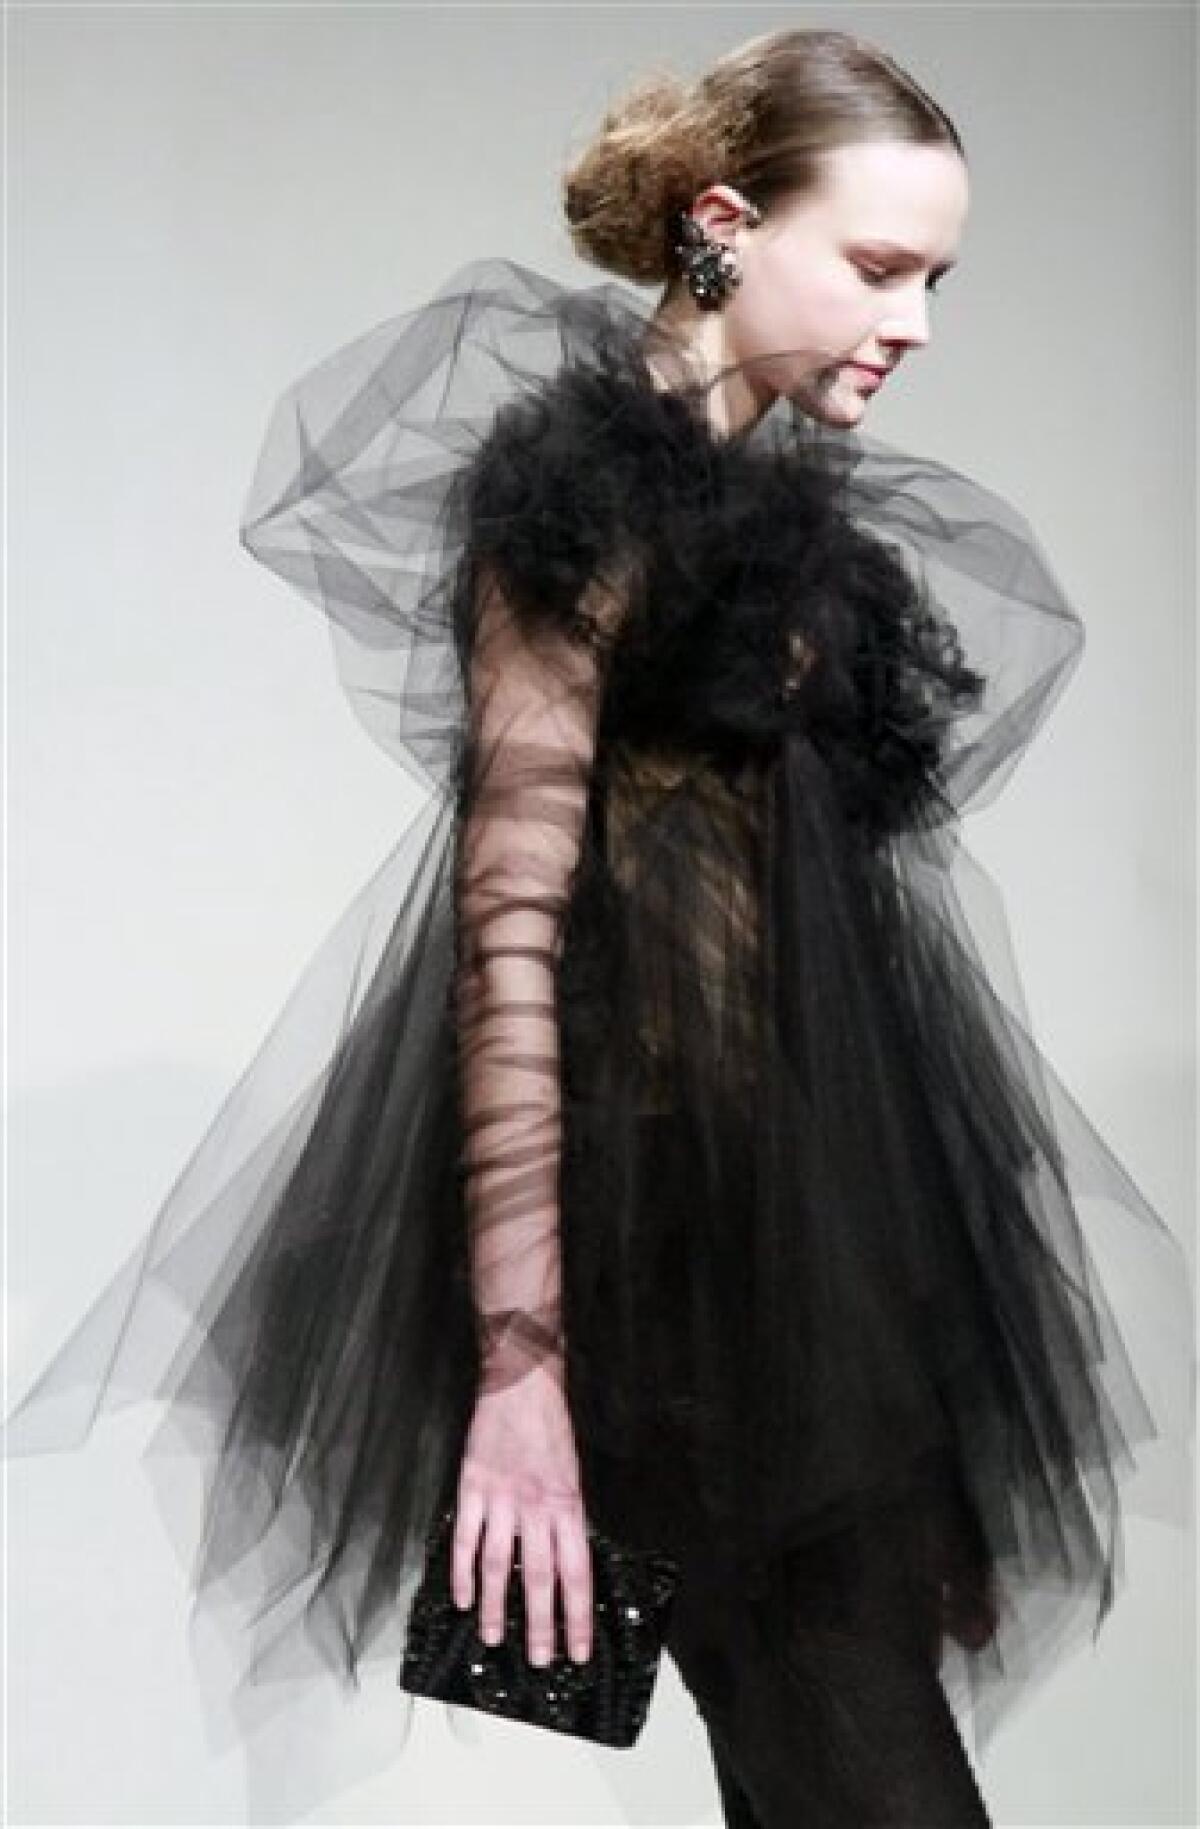 Fashion from the fall 2011 Marchesa collection is modeled on Wednesday, Feb. 16, 2011 in New York. (AP Photo/Bebeto Matthews)